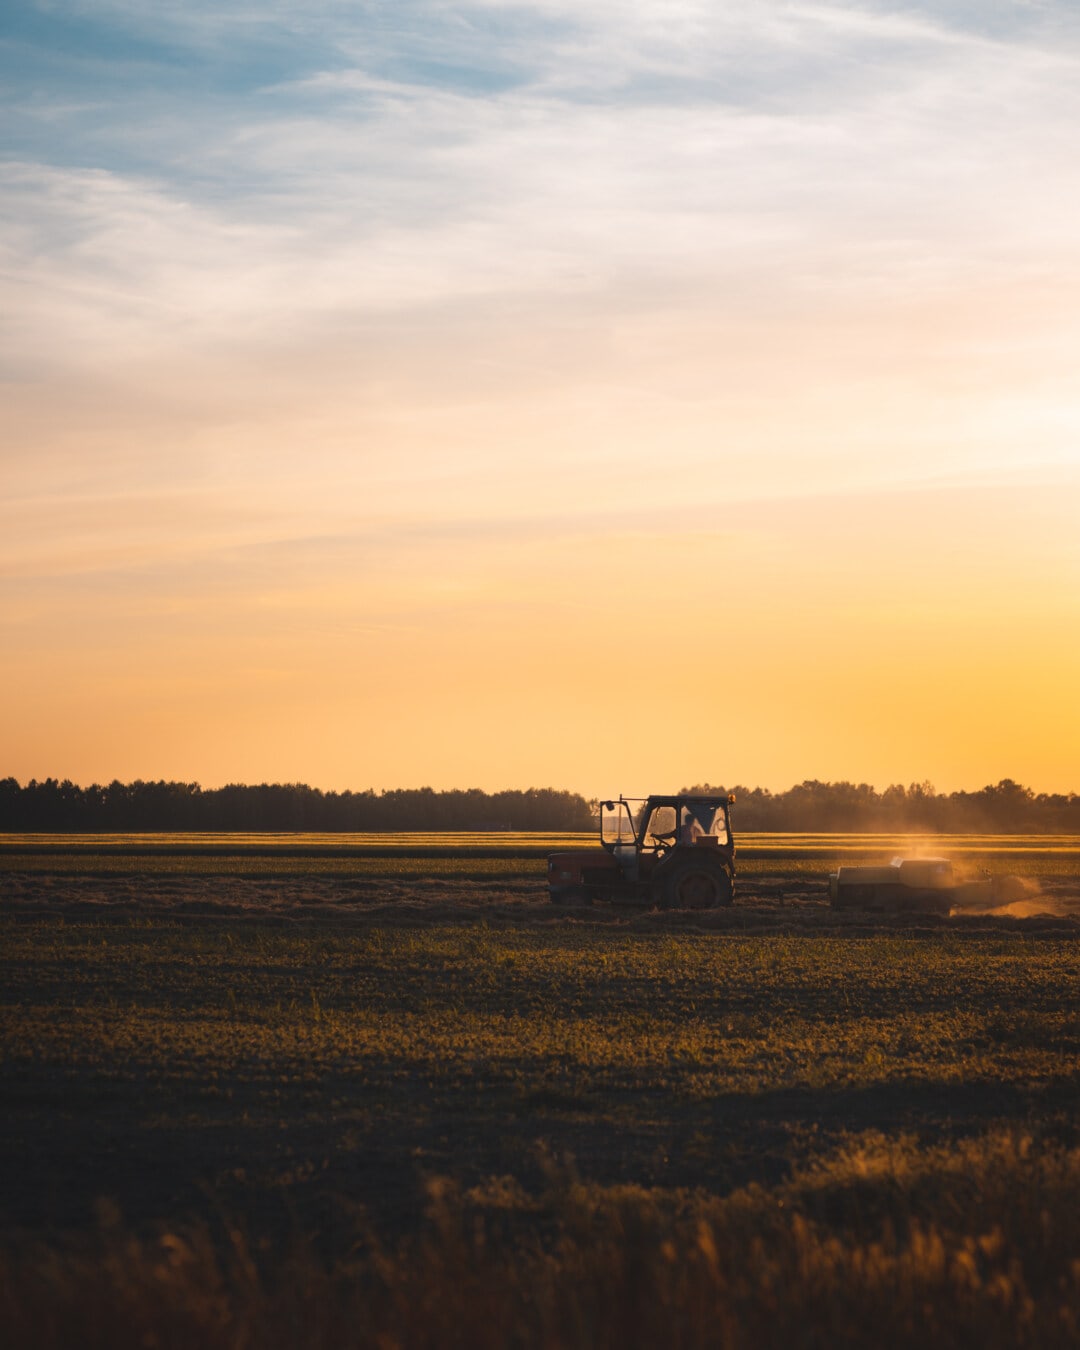 tractor, driving, agriculture, sunset, farmland, working, farming, dawn, landscape, field